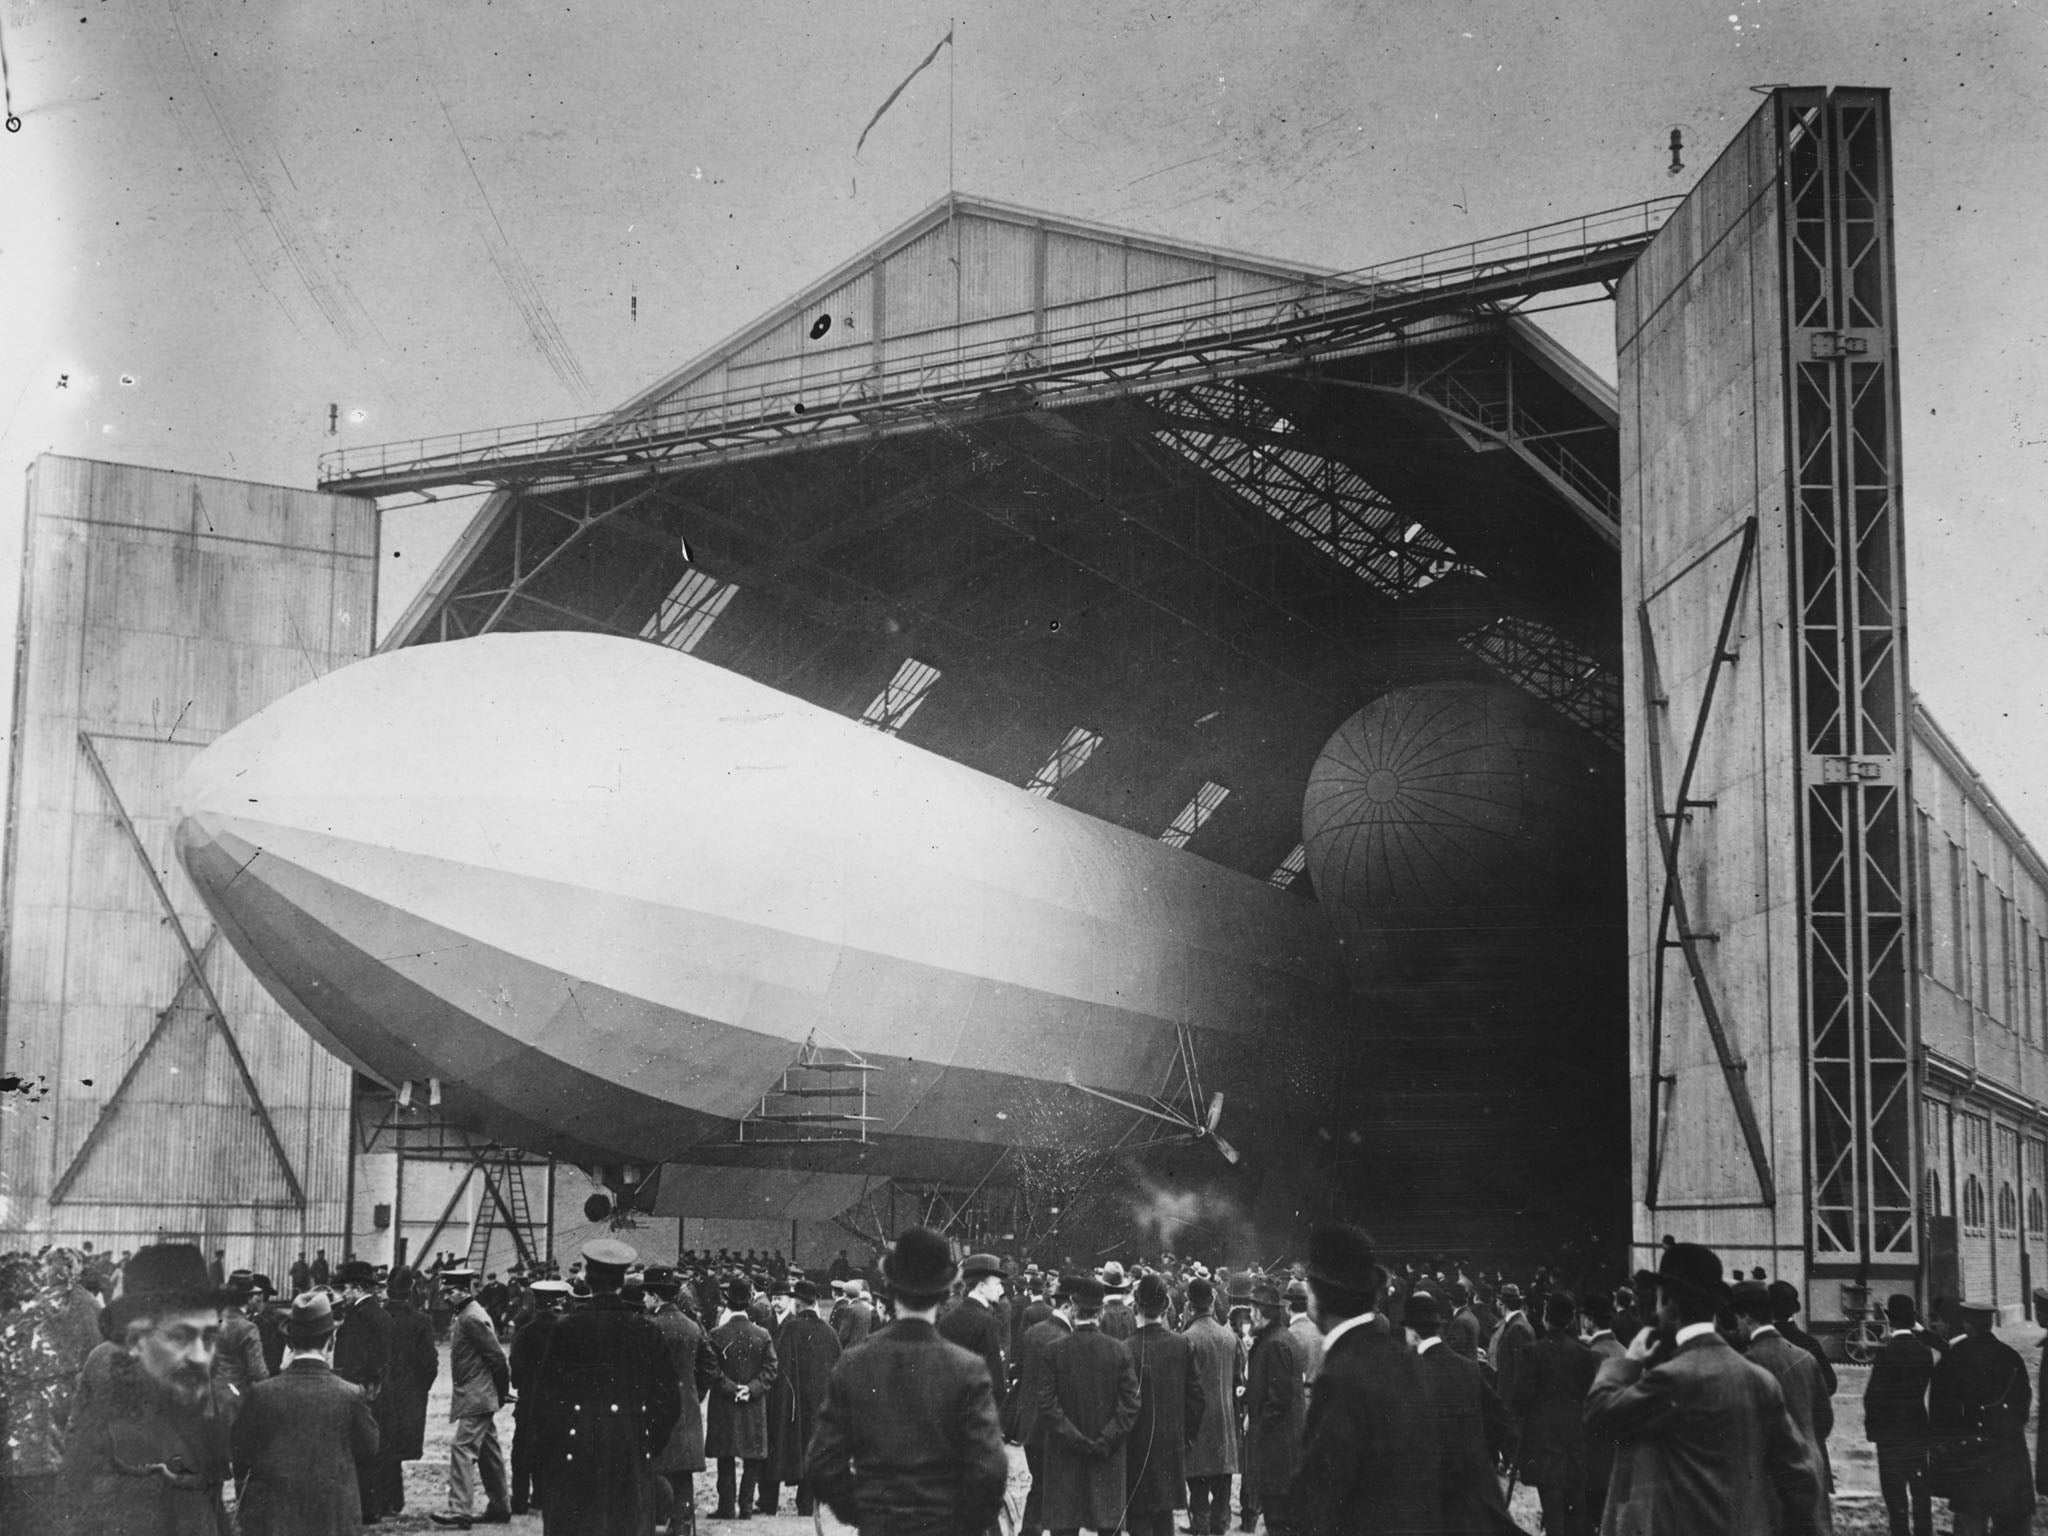 An airship shed in Dusseldorf, circa 1914: the Zeppelin was one of the most successful airships of all time